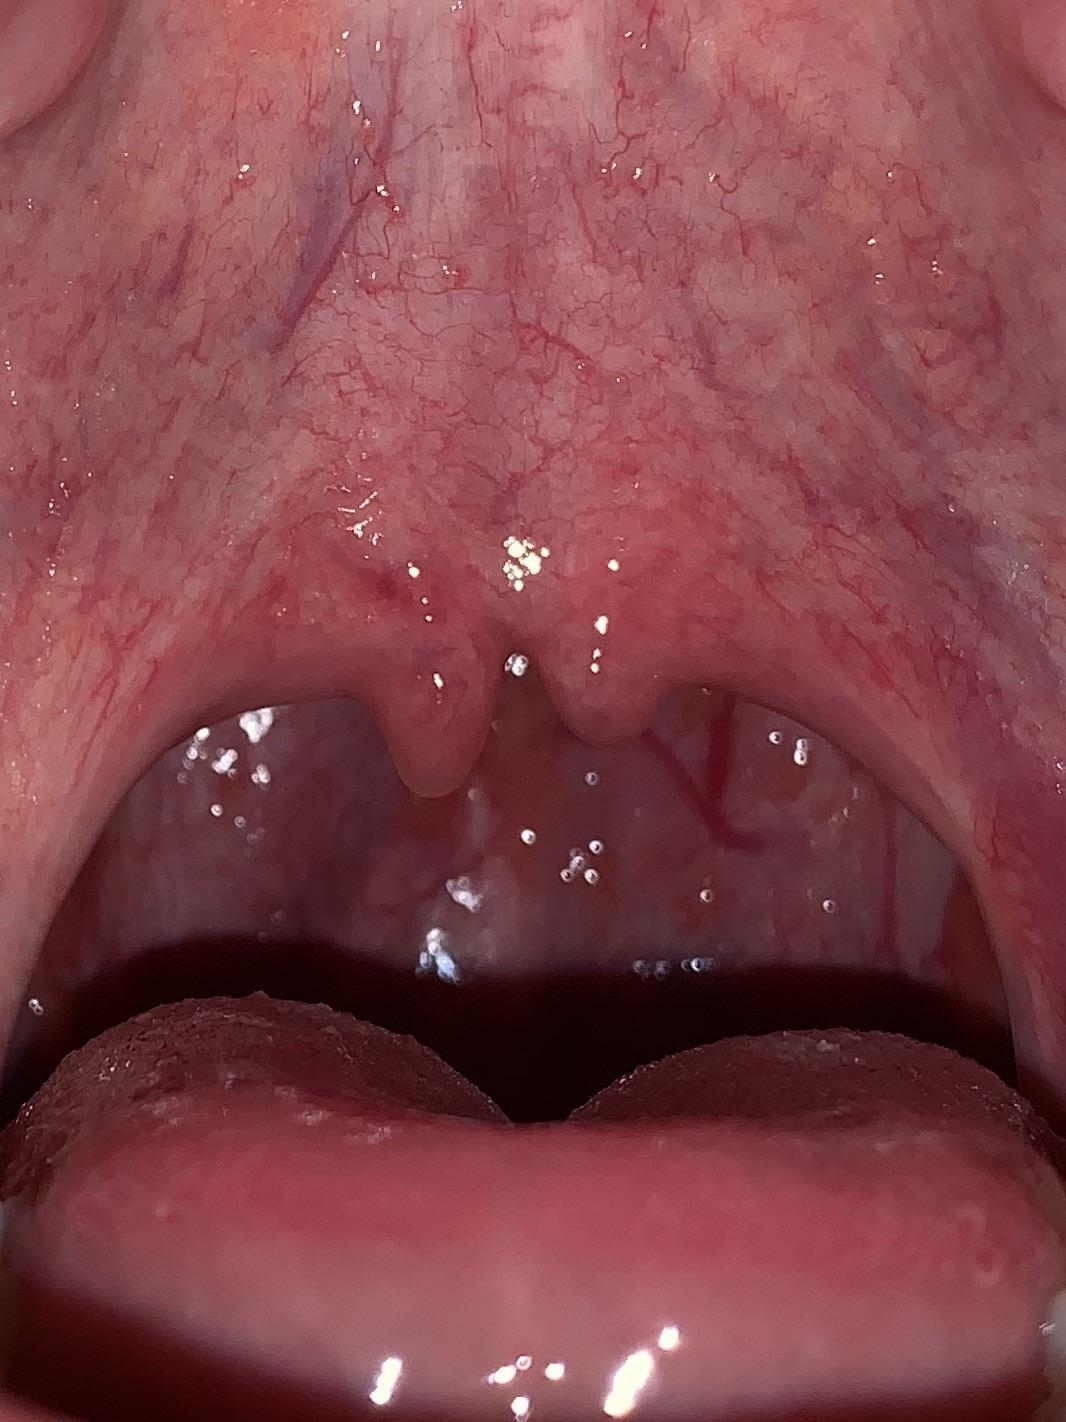 A split uvula in someone&#x27;s mouth